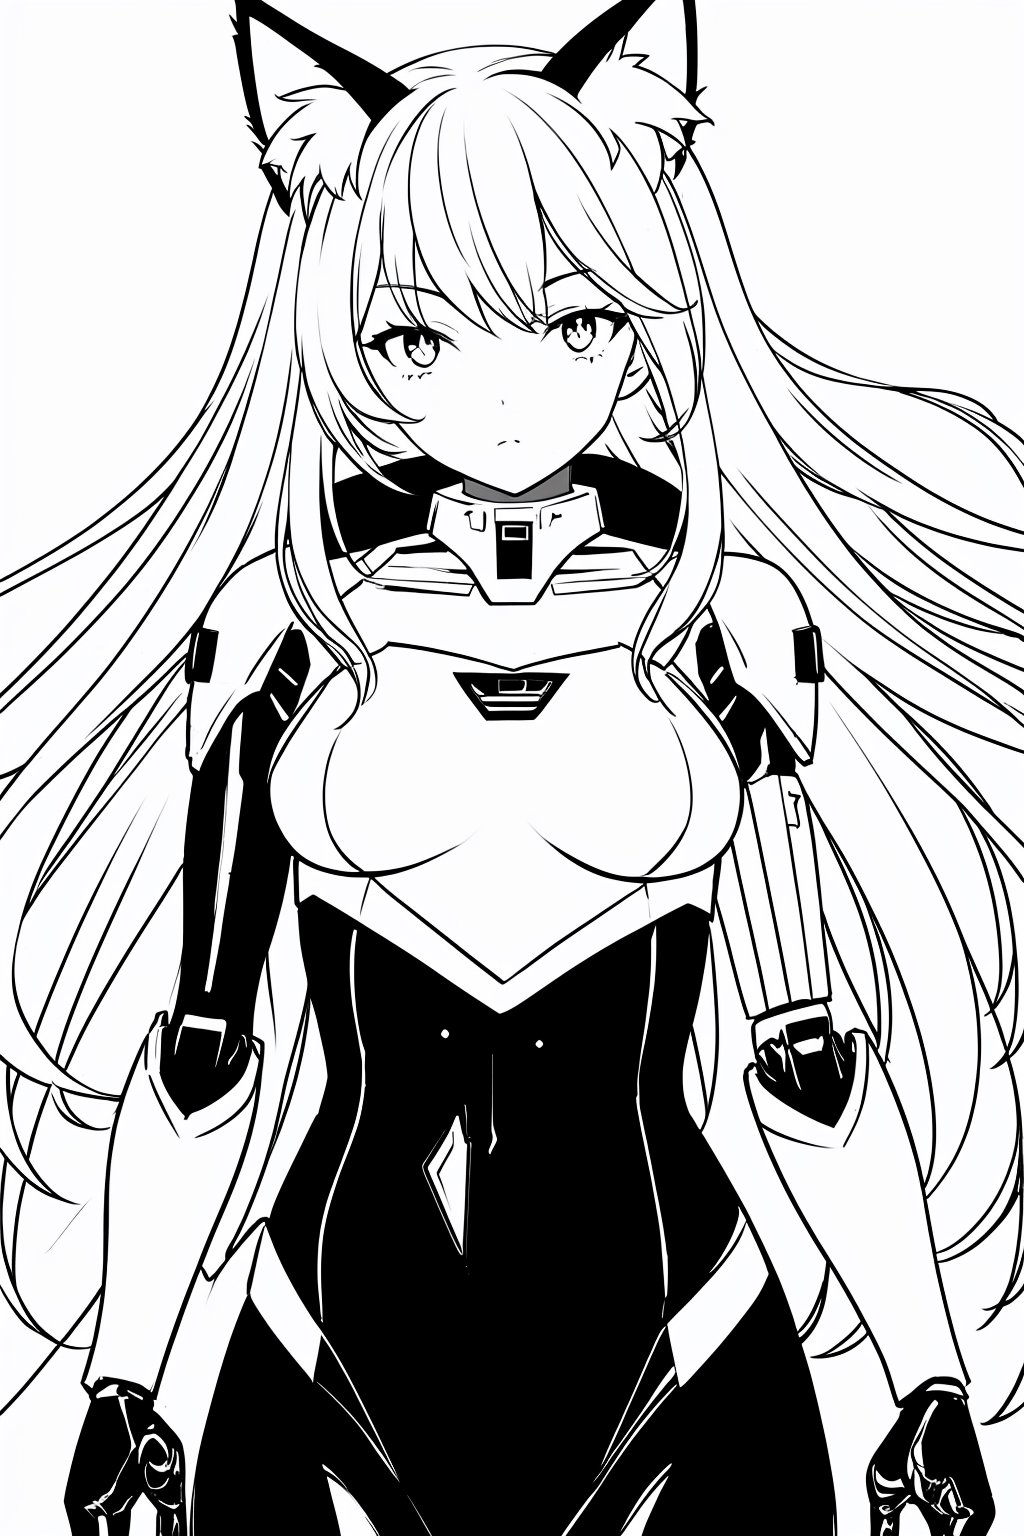 Beautiful girl with cat like ears wearing a suit (bodysuit) that is a tight fit. medium breasts, slime thicc,, 1 girl,mecha,line anime,fujimotostyle,LINEART,
masterpiece, best quality, aesthetic,line art,monochome,mecha,robot,masterpiece